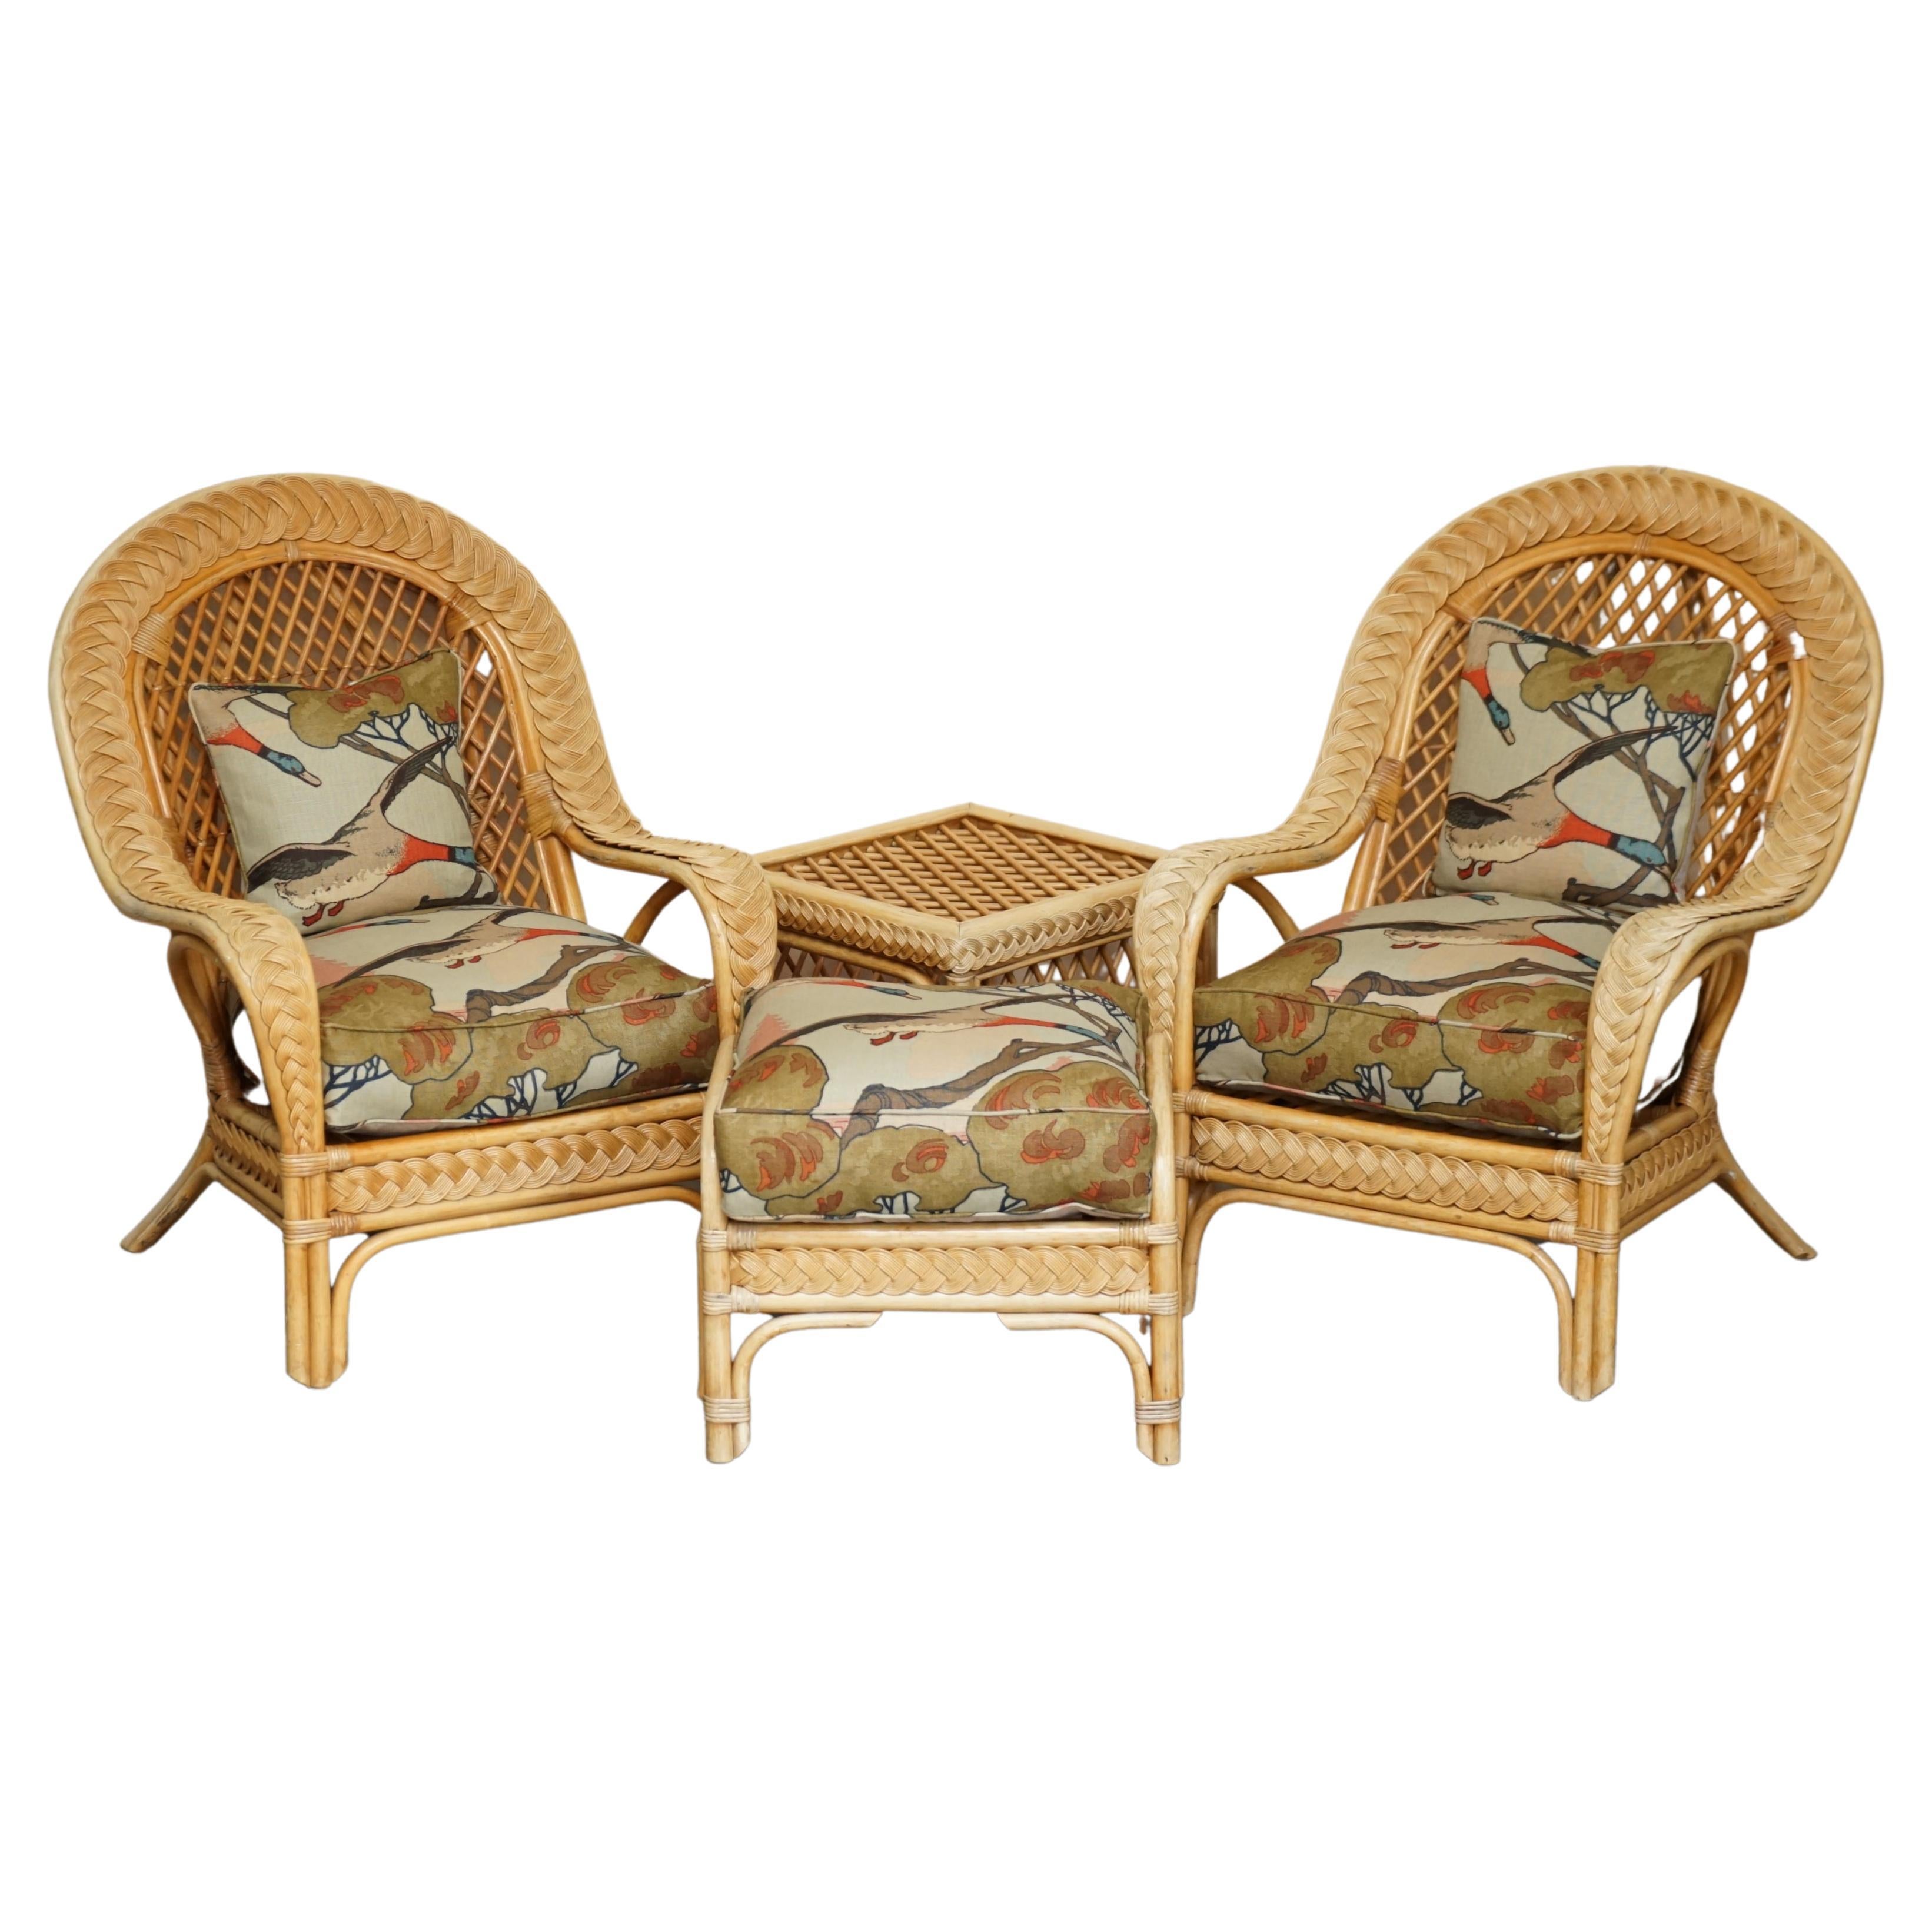 WICKER ARMCHAIRS STOOL TABLE SUITE UPHOLSTERED WiTH MULBERRY FLYING DUCKS FABRIC For Sale